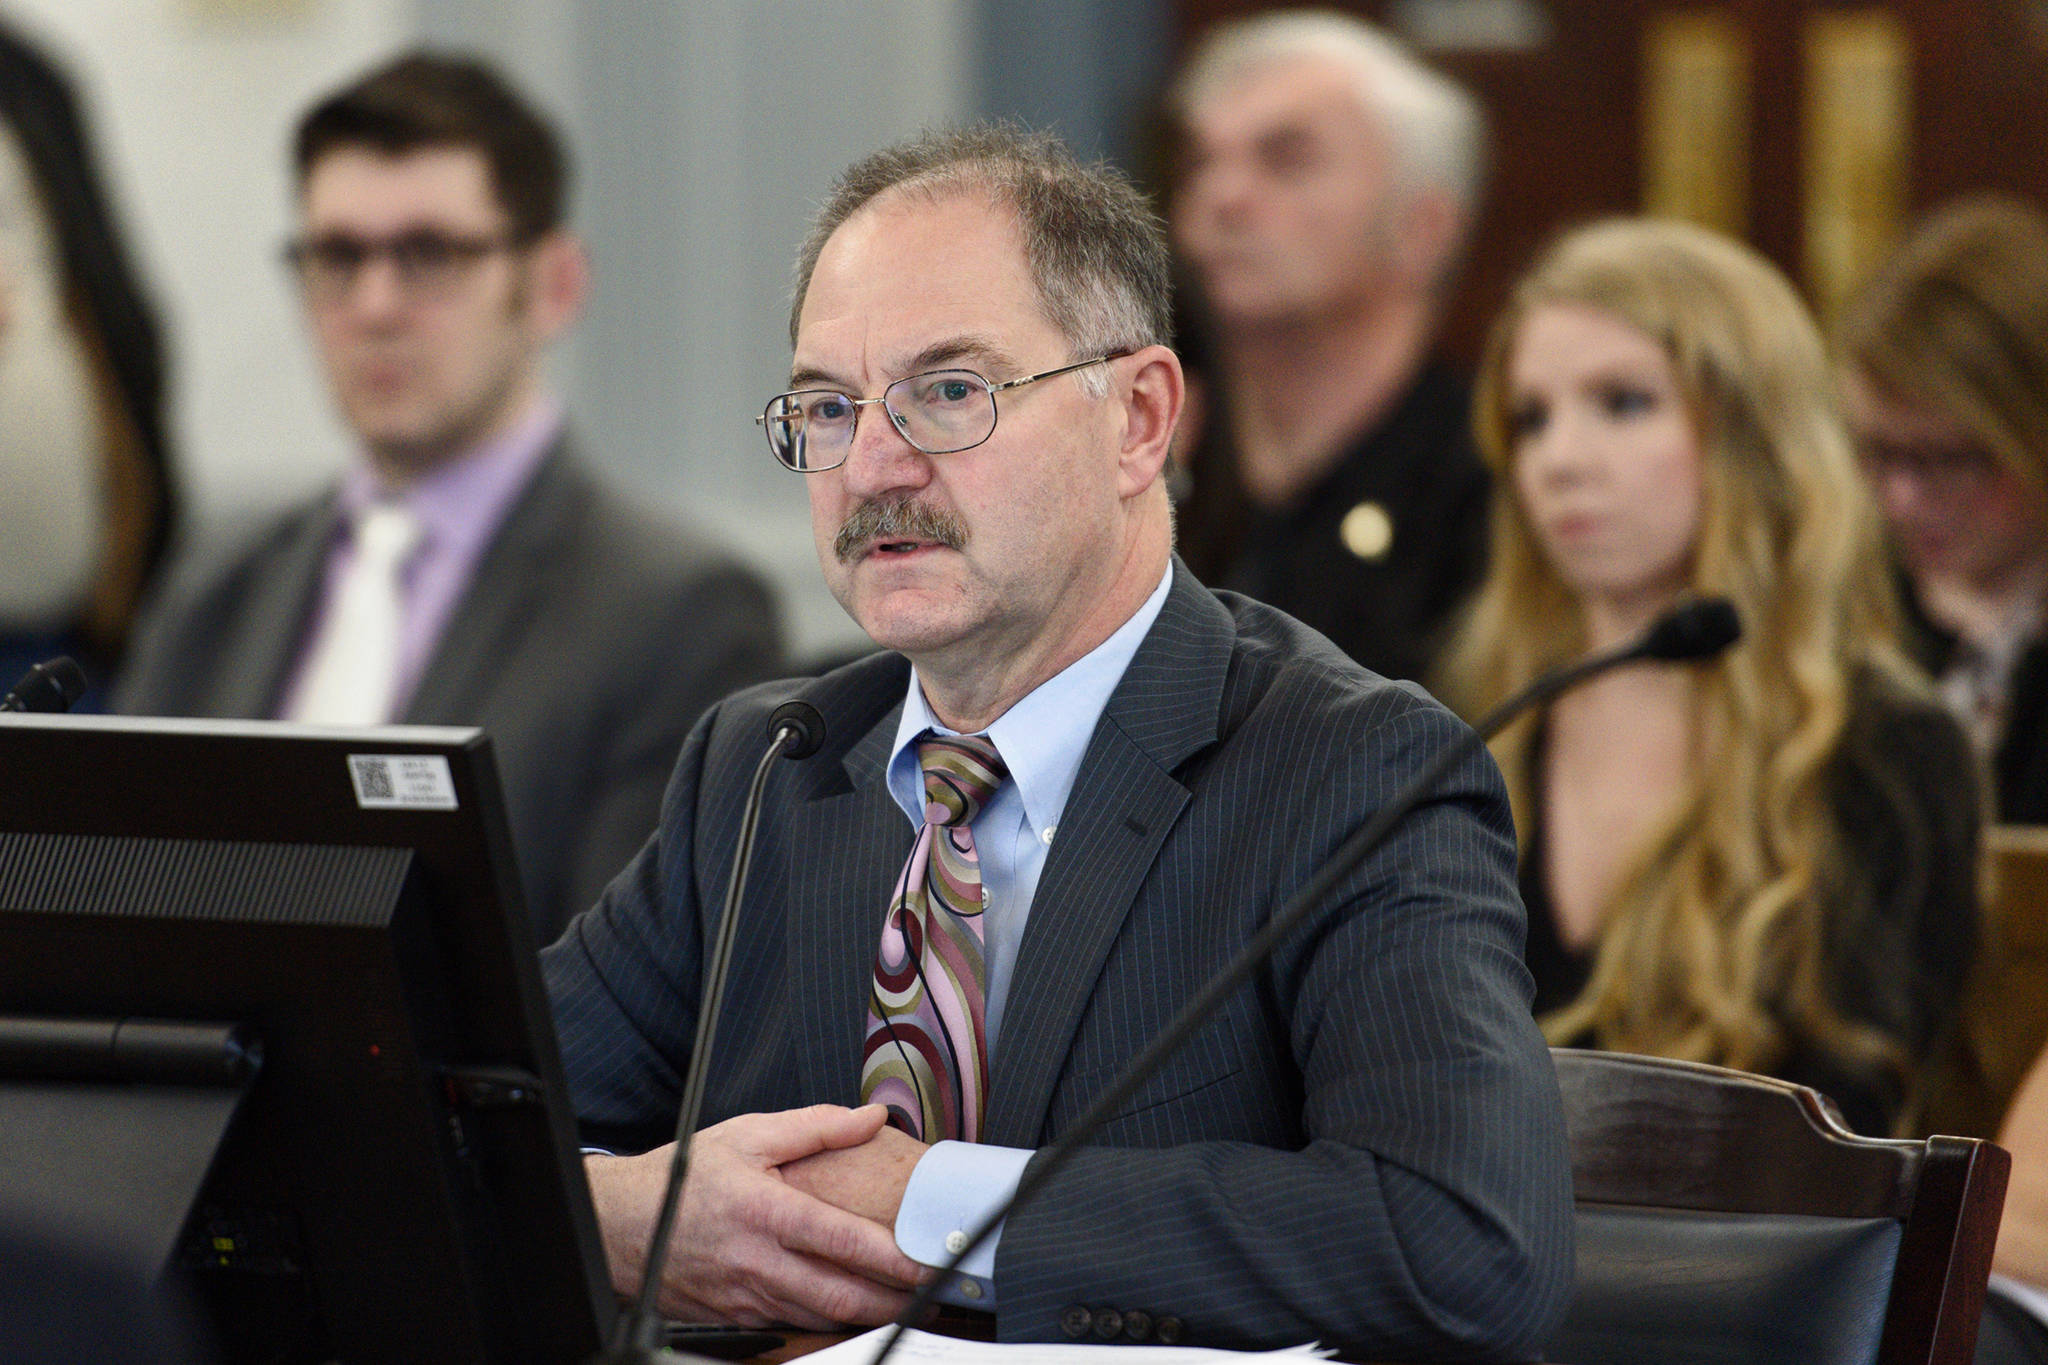 David Teal, director of Legislative Finance, gives an overview of the state’s fiscal situation to the Senate Finance Committee at the Capitol on Wednesday, Jan. 23, 2019. (Michael Penn | Juneau Empire File)